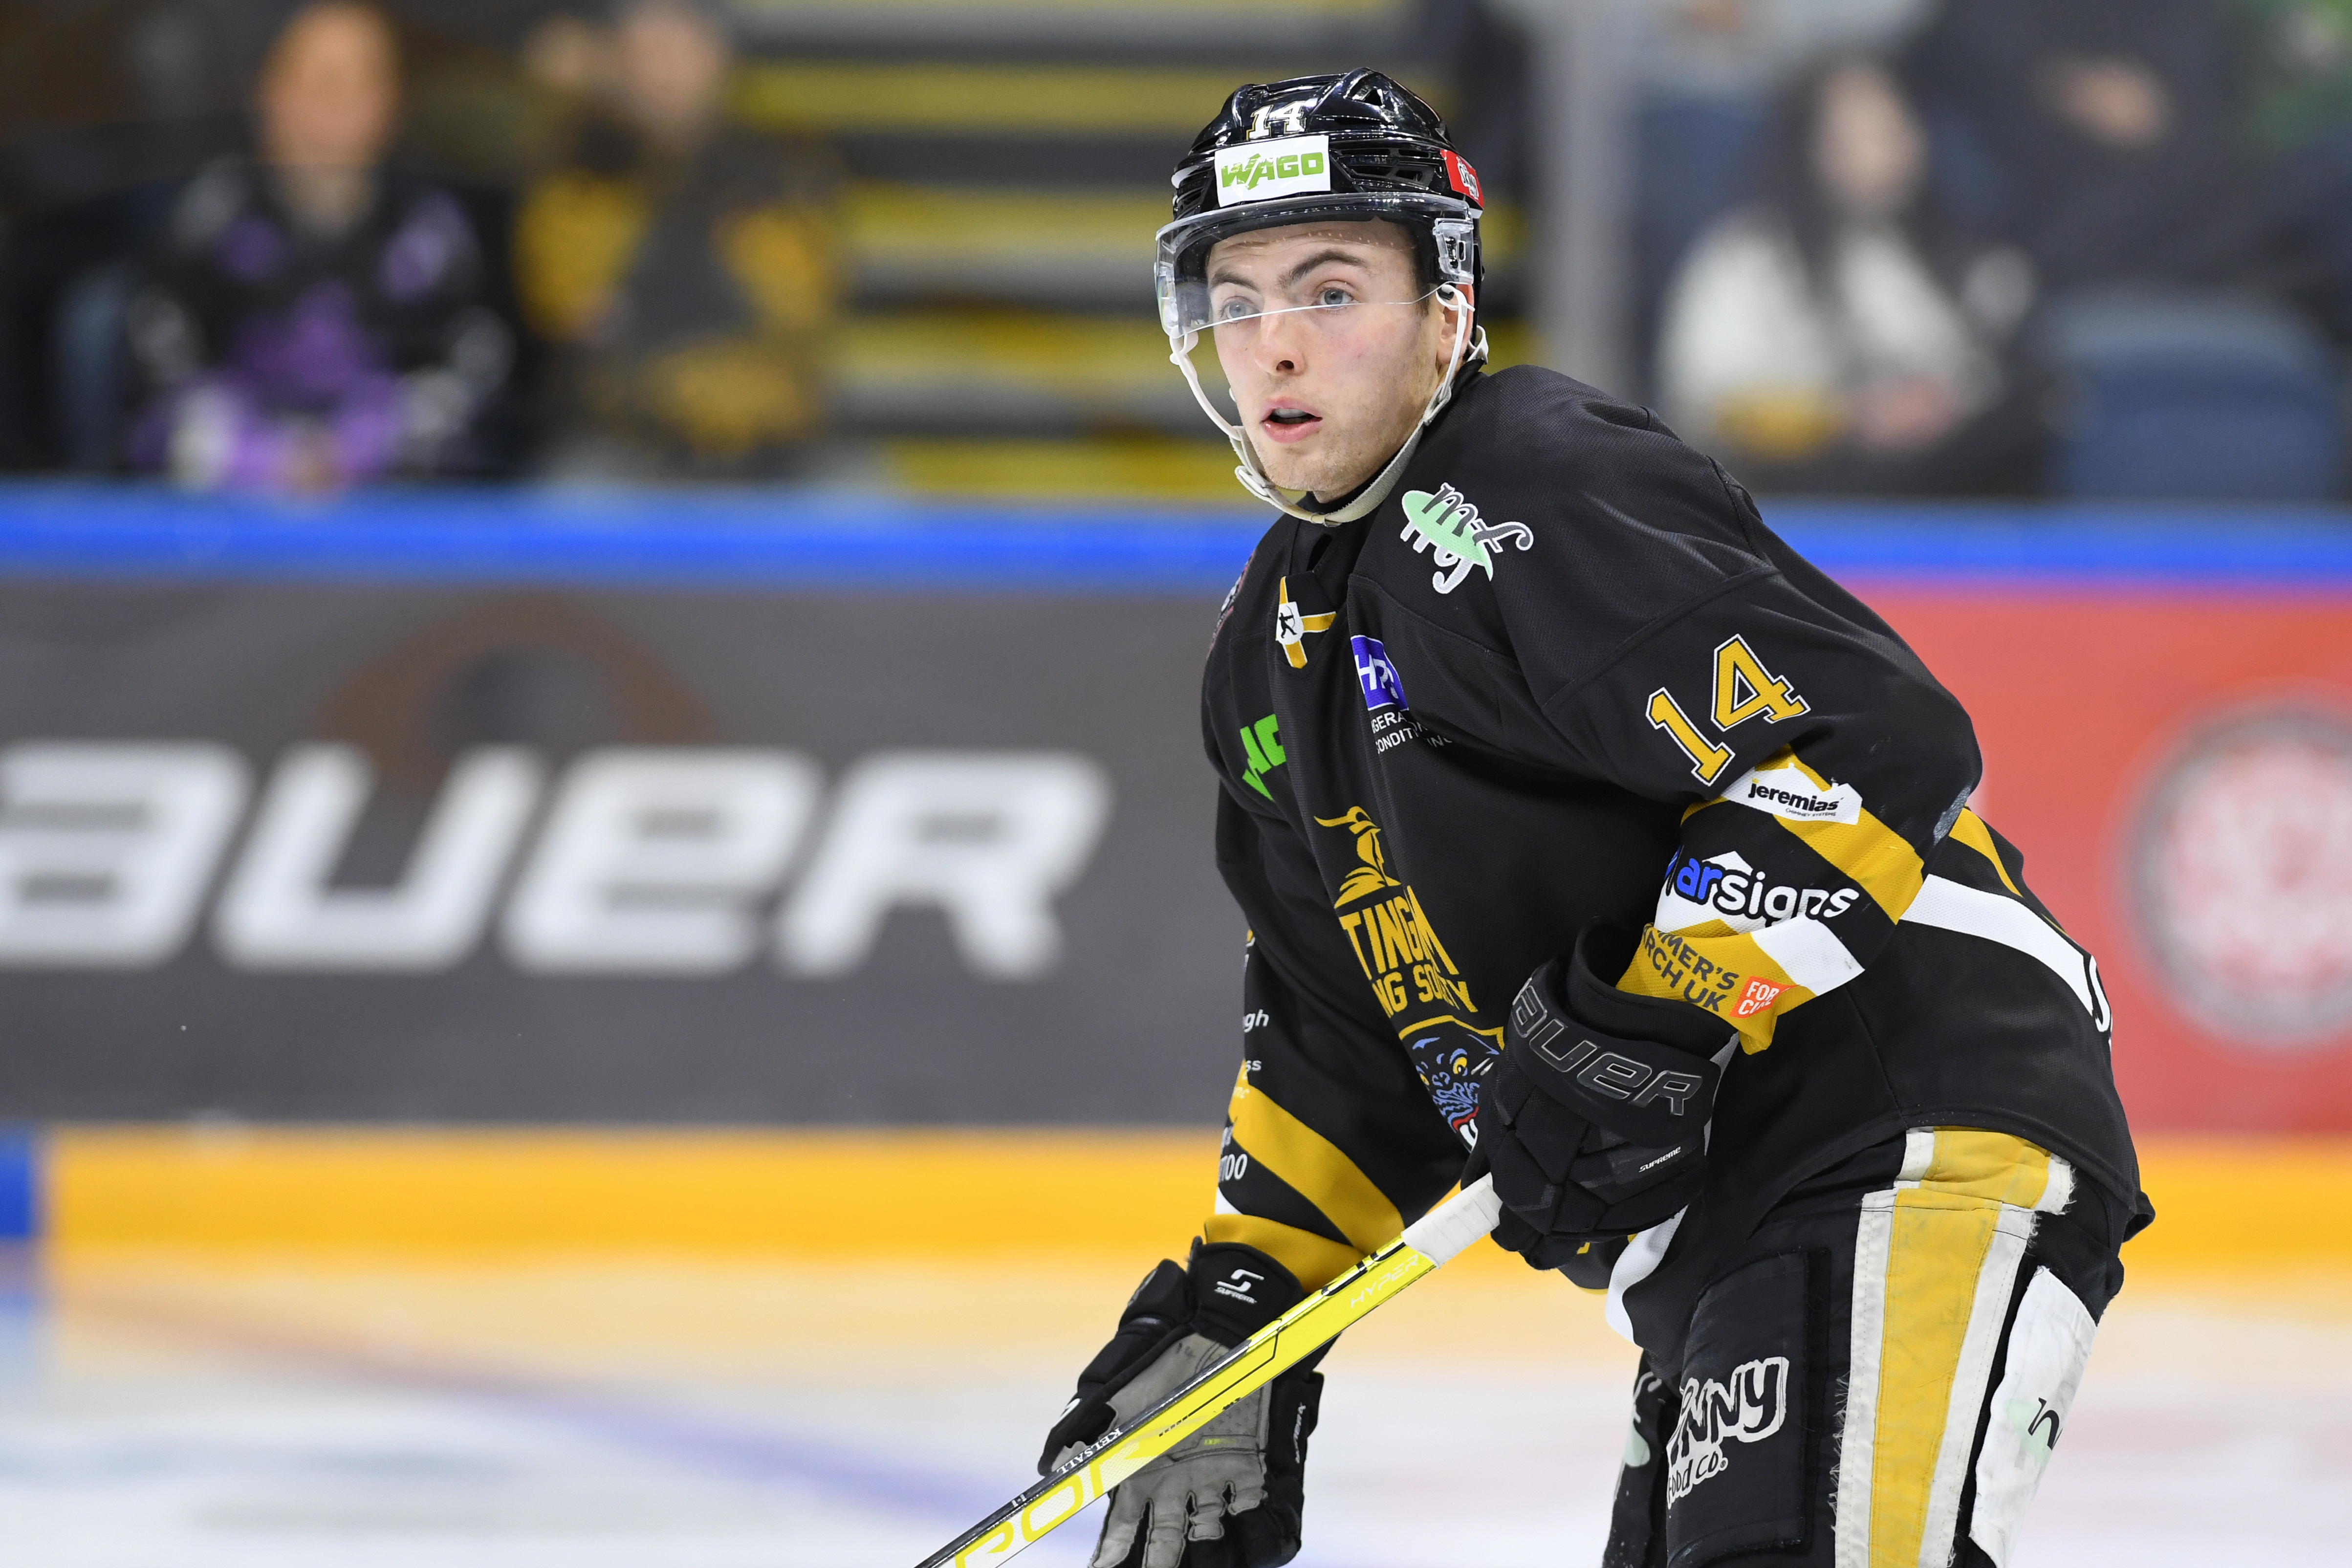 KELSALL CHATS TO PANTHERS TV AFTER PUTTING PEN-TO-PAPER Top Image